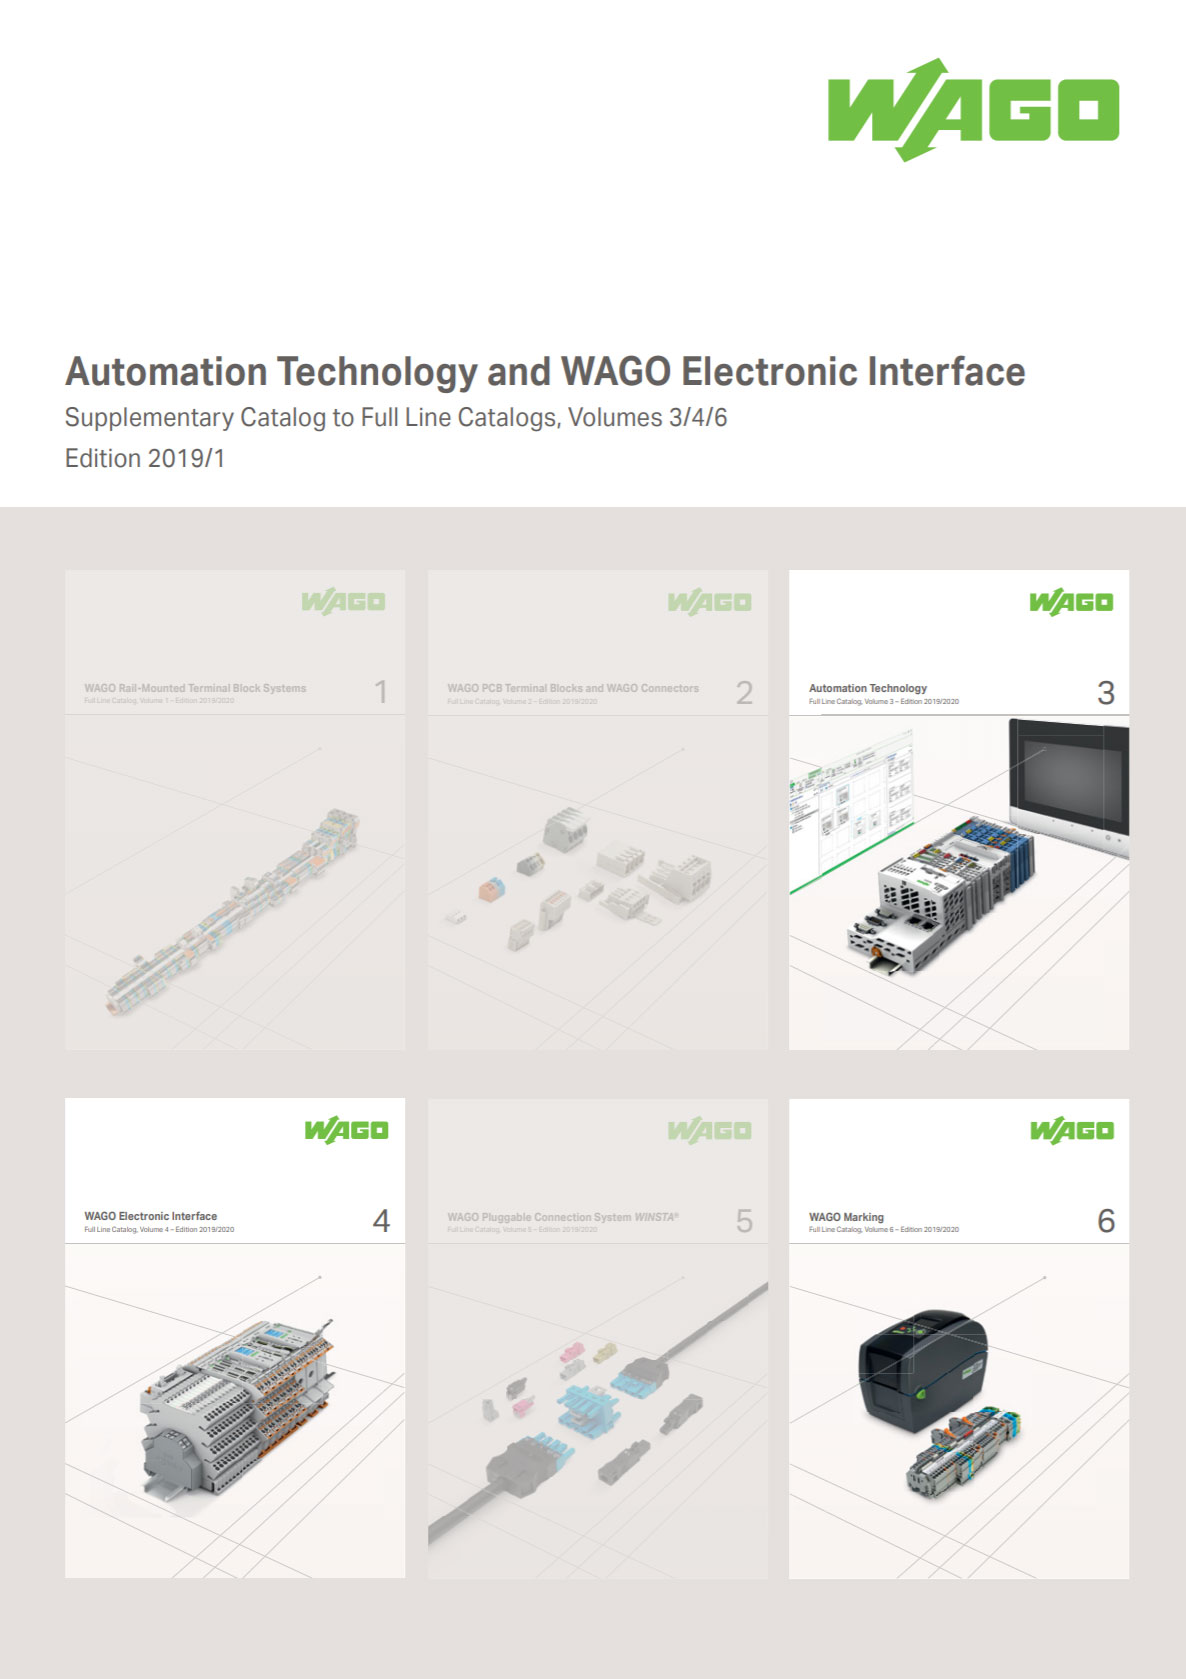 Wago automation technology and wago electronic interface catalog cover